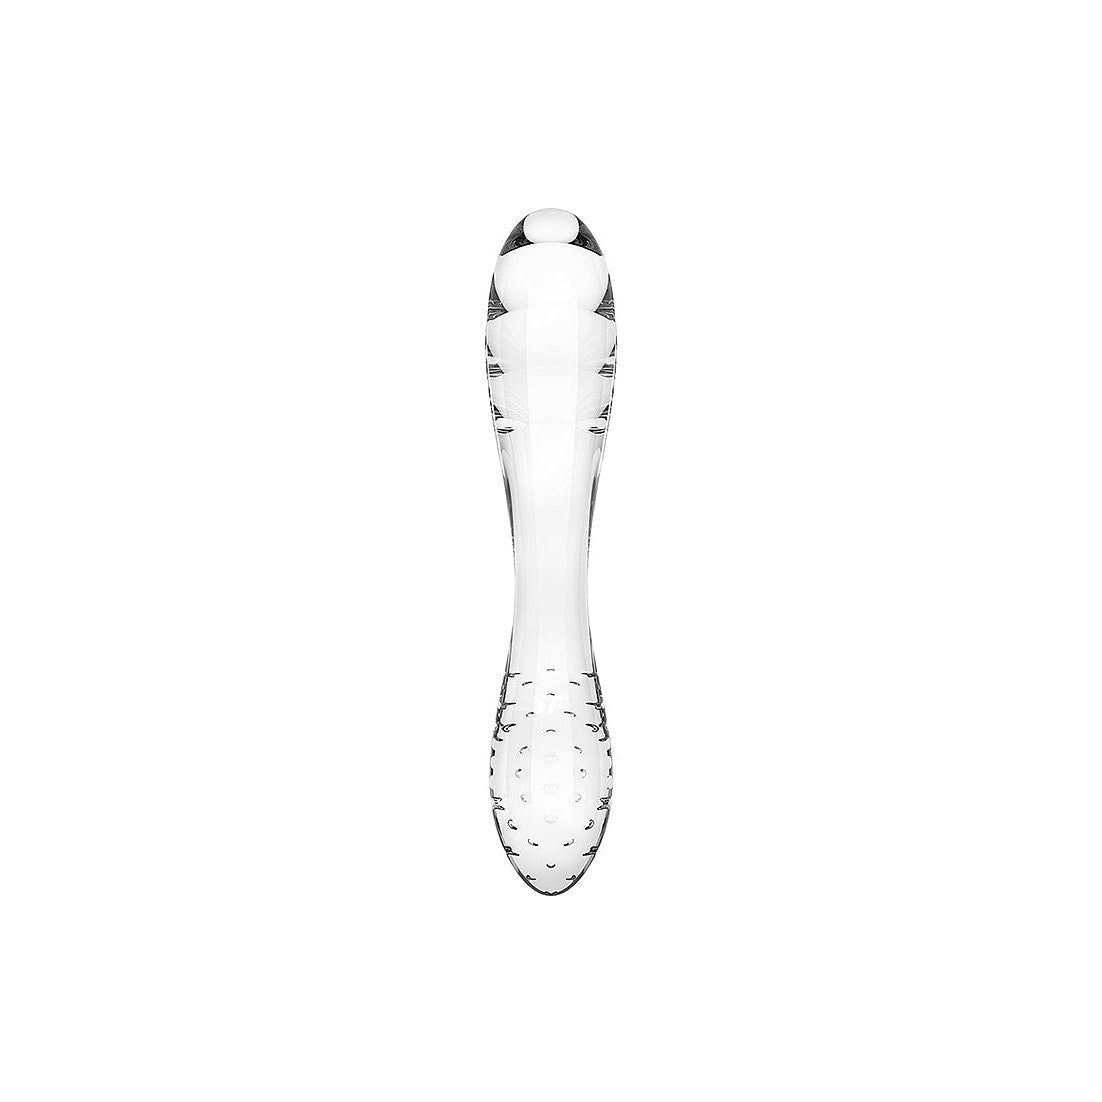 Dazzling Crystal 1 Glass Massager